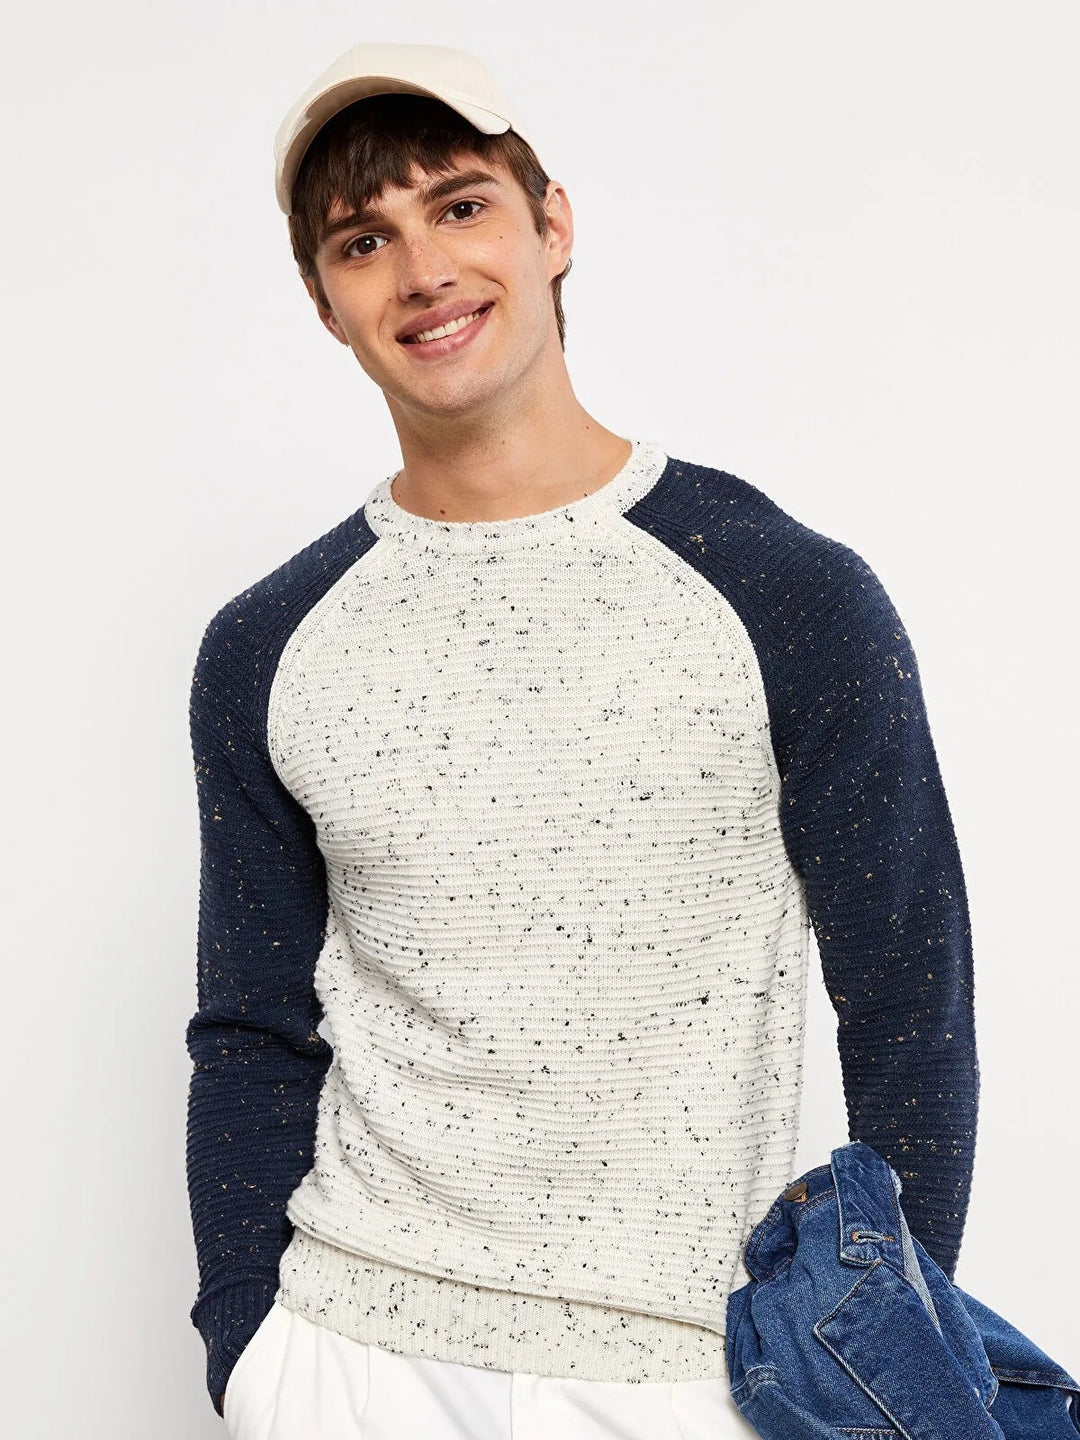 Crew Neck Long Sleeve Men Knit Sweater With Color Block